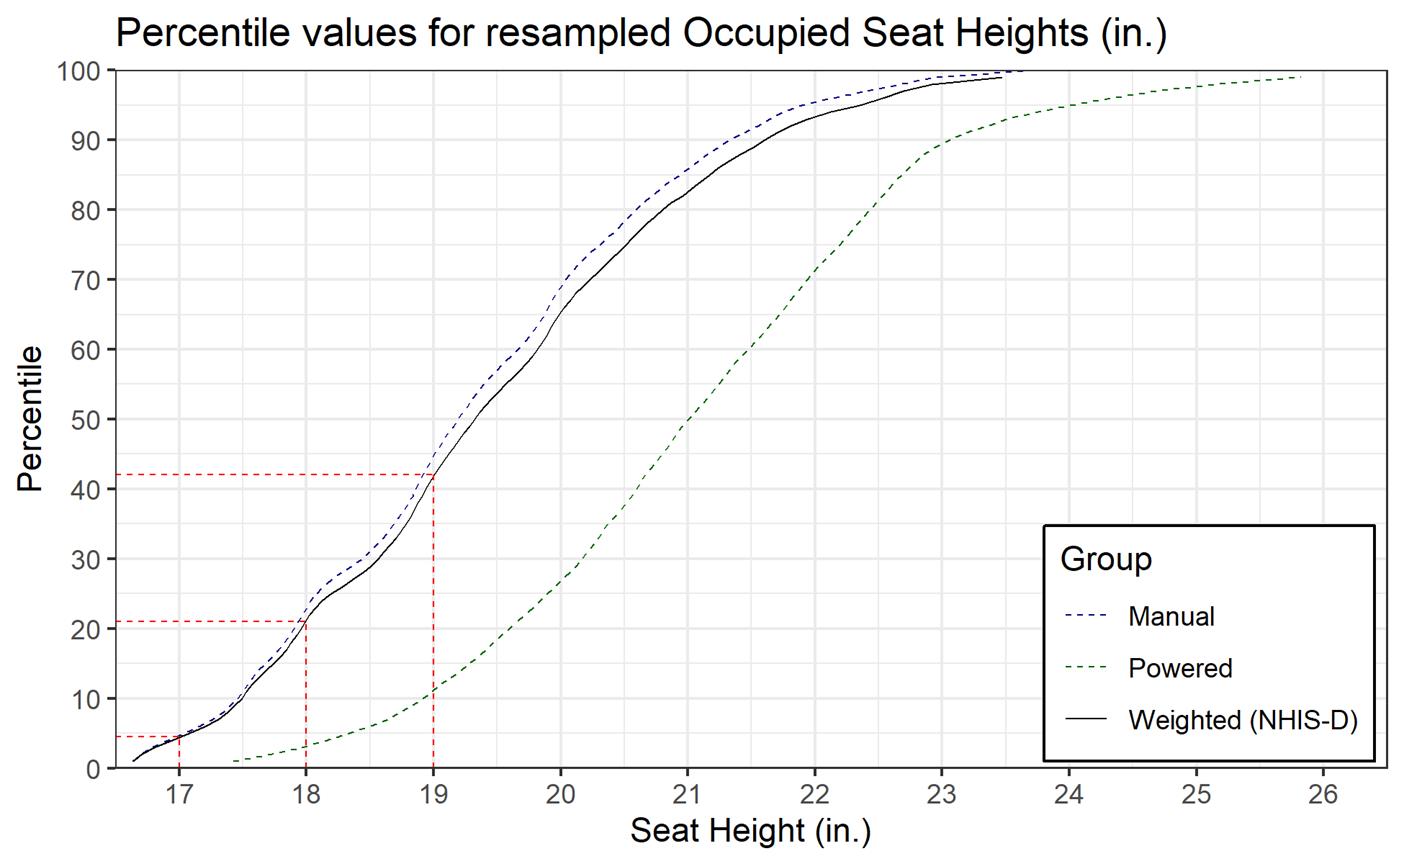 Graph labeled Percentile values for resampled Occupied Seat Heights (in.).  Y axis is percentile, 0 to 100, in increments of 10.  The X axis is Seat Height (in.) from 16 to 27.   A key in lower right corner reads Group showing Manual uses a dashed line, Powered uses a dotted line, and a solid line is used for Weighted (NHIS-D).  Three lines in red trace vertically from 17, 18, 19 on the X axis, up to the solid line, and then horizontally left to the Y axis.  The solid cumulative plot line representing the total sample generally tracks the line for manual chair users ranges from below 17 inches to approximately 23.5 inches. A cumulative plot line representing powered chair users indicates higher seat heats ranging from approximately 17.5 inches to approximately 25.8 inches.